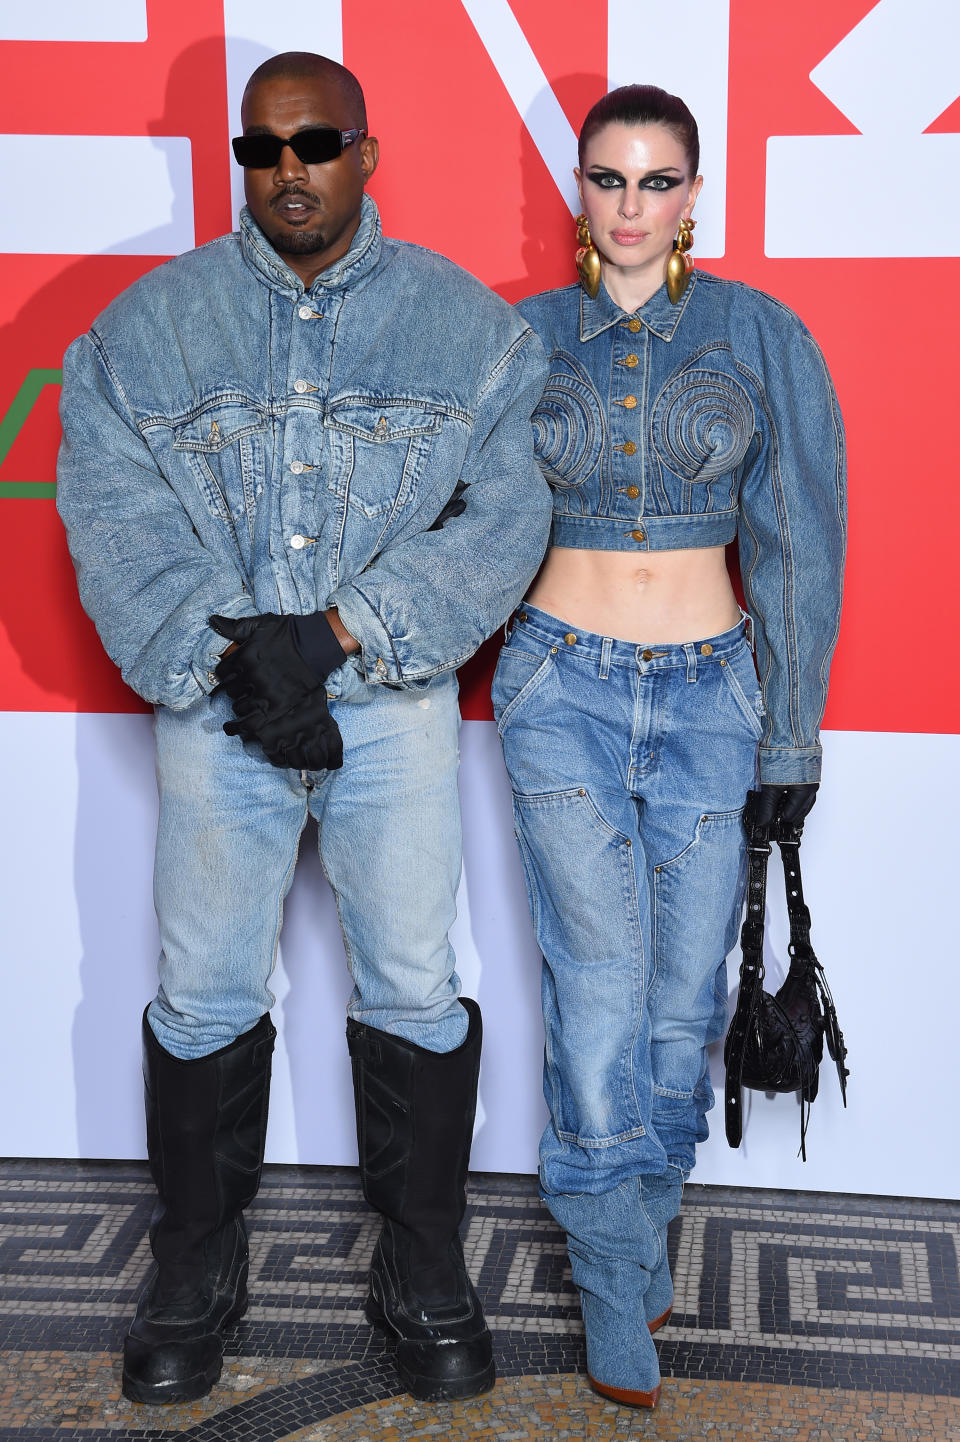 Kanye and Julia Fox posing together, they're both wearing bonkers outfits that are denim from head to toe